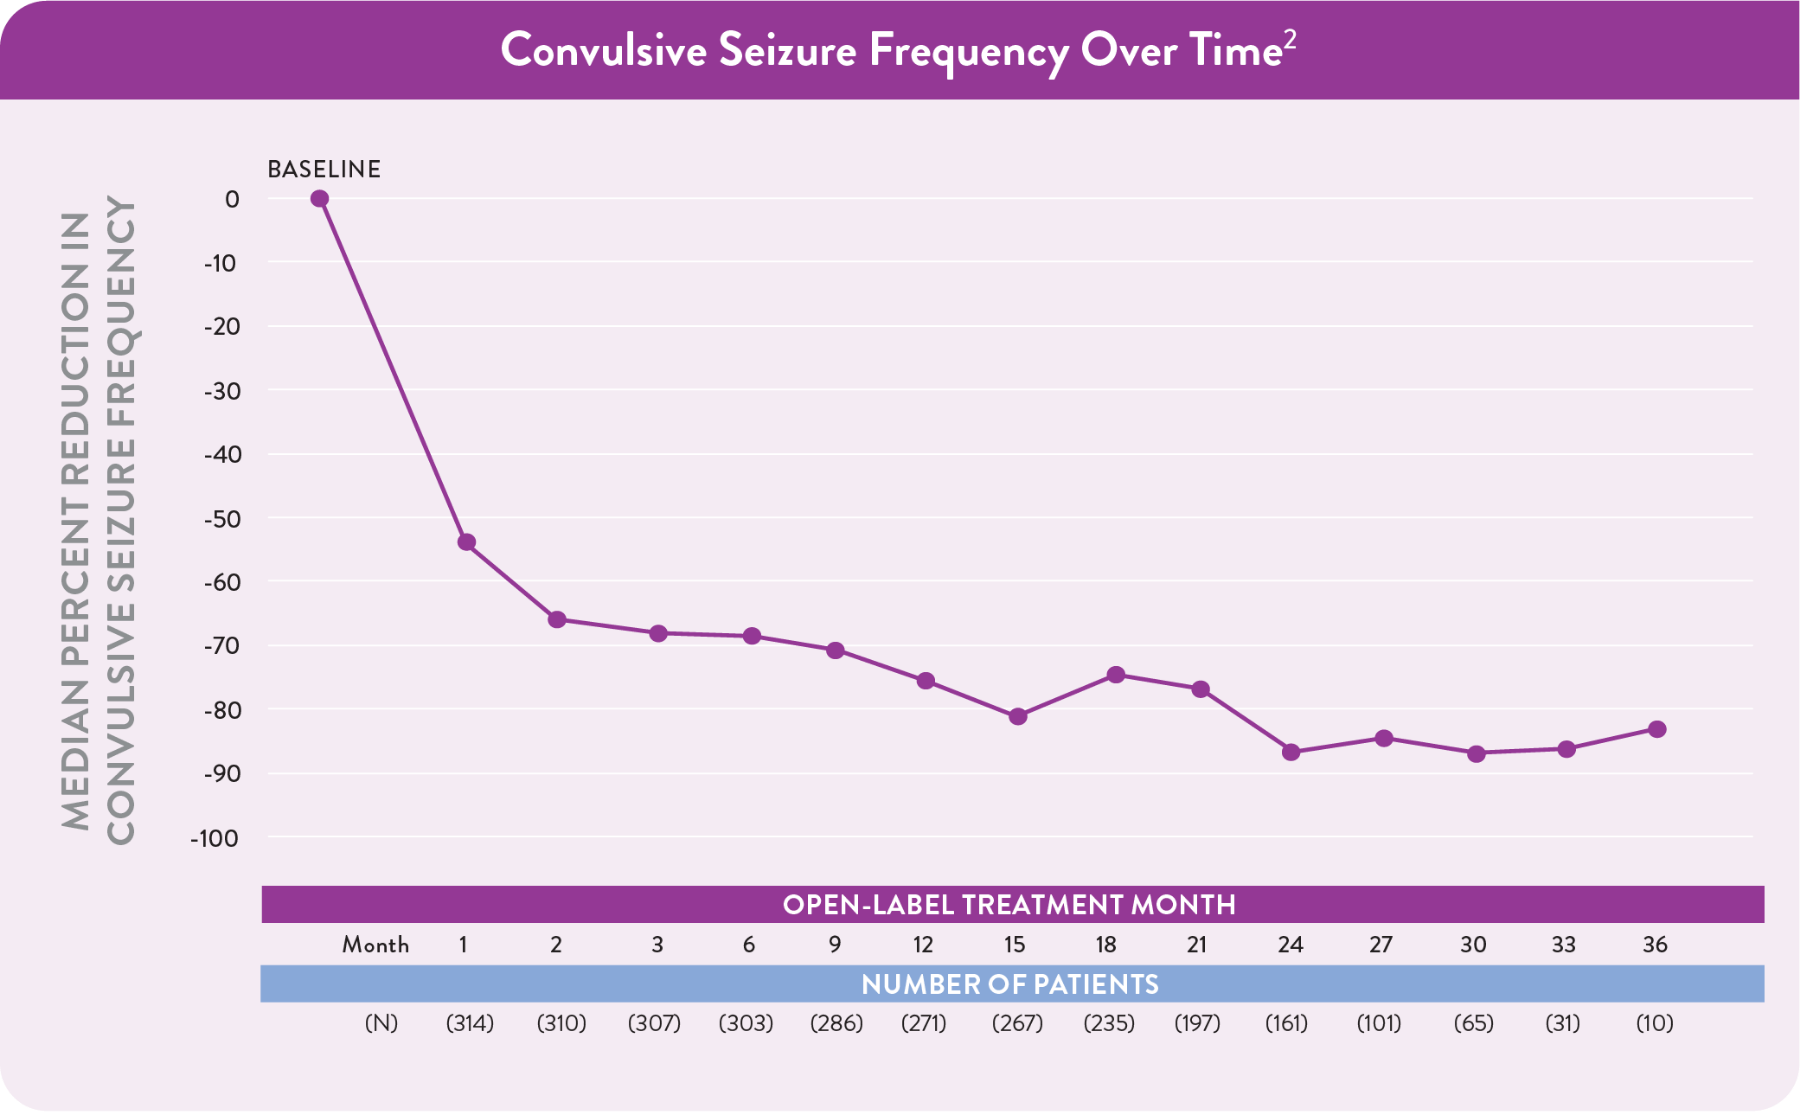 Graph showing the decrease in convulsive seizure frequency over time among patients with Dravet syndrome.